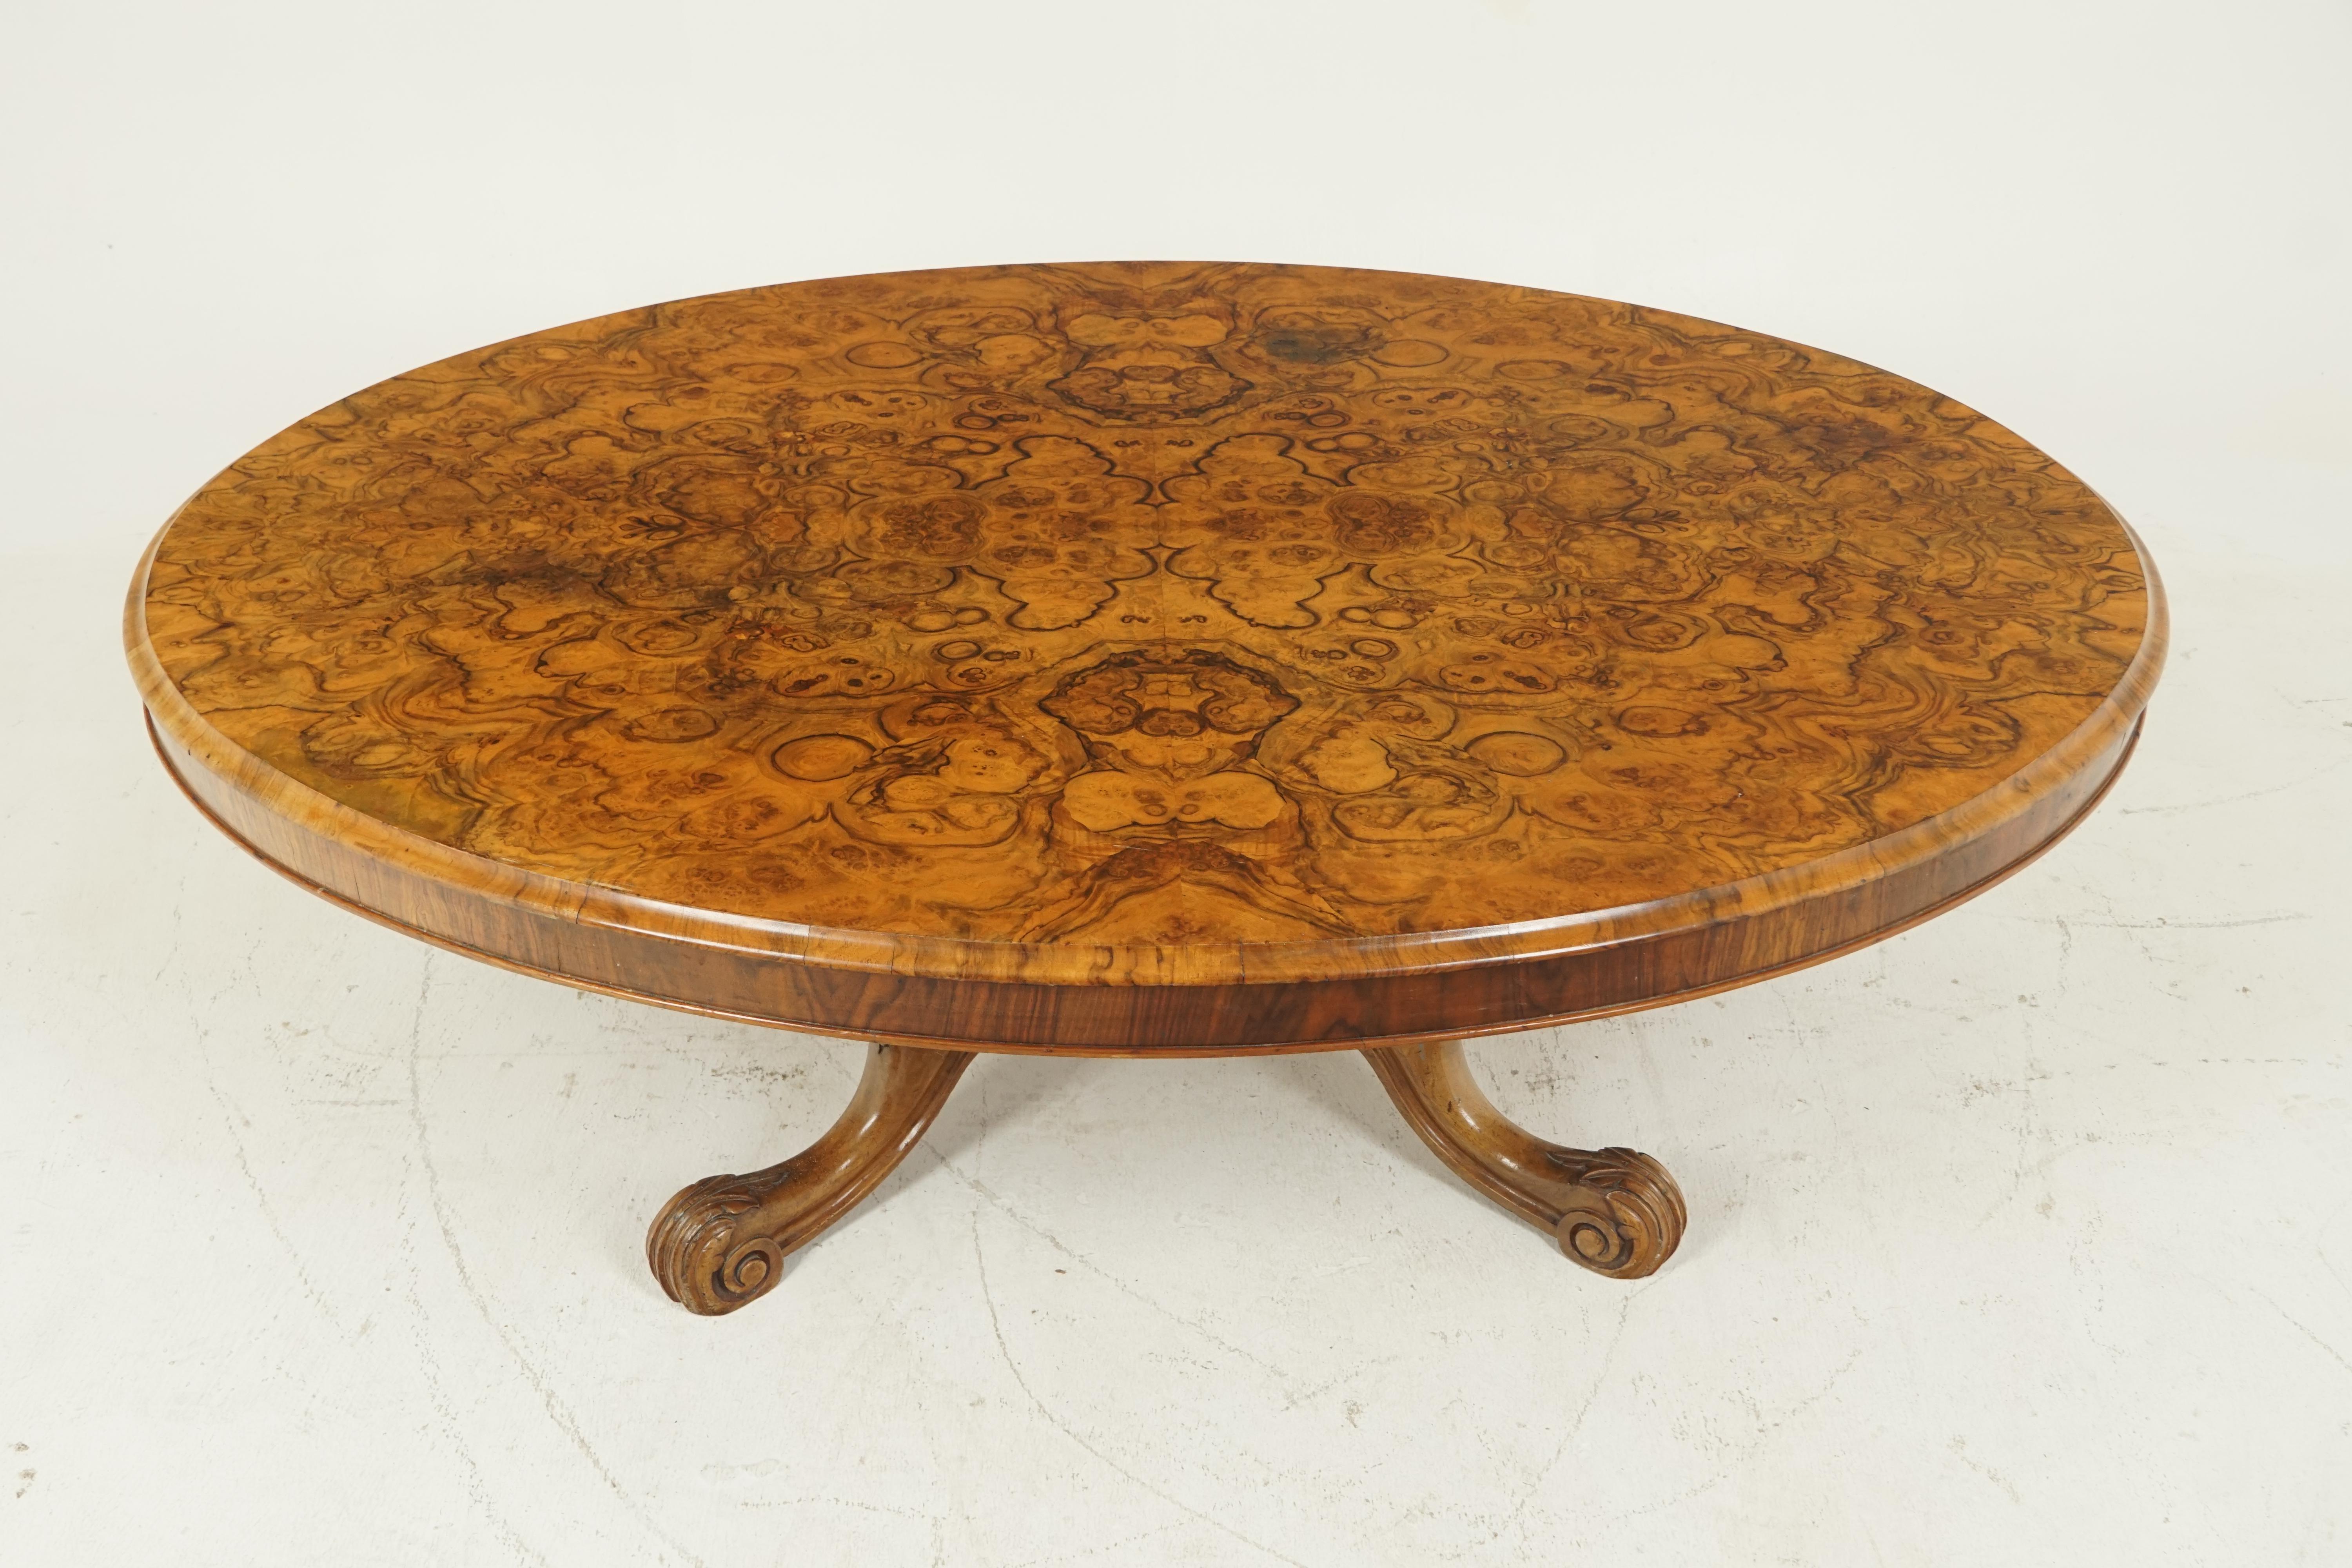 Antique Victorian burr walnut reduced coffee table, Scotland 1870, B2087 

Scotland 1870
Solid walnut and veneer
Original finish
Oval in shape with a moulded edge
With a wonderful burr walnut top
The table top is all supported by a turned and